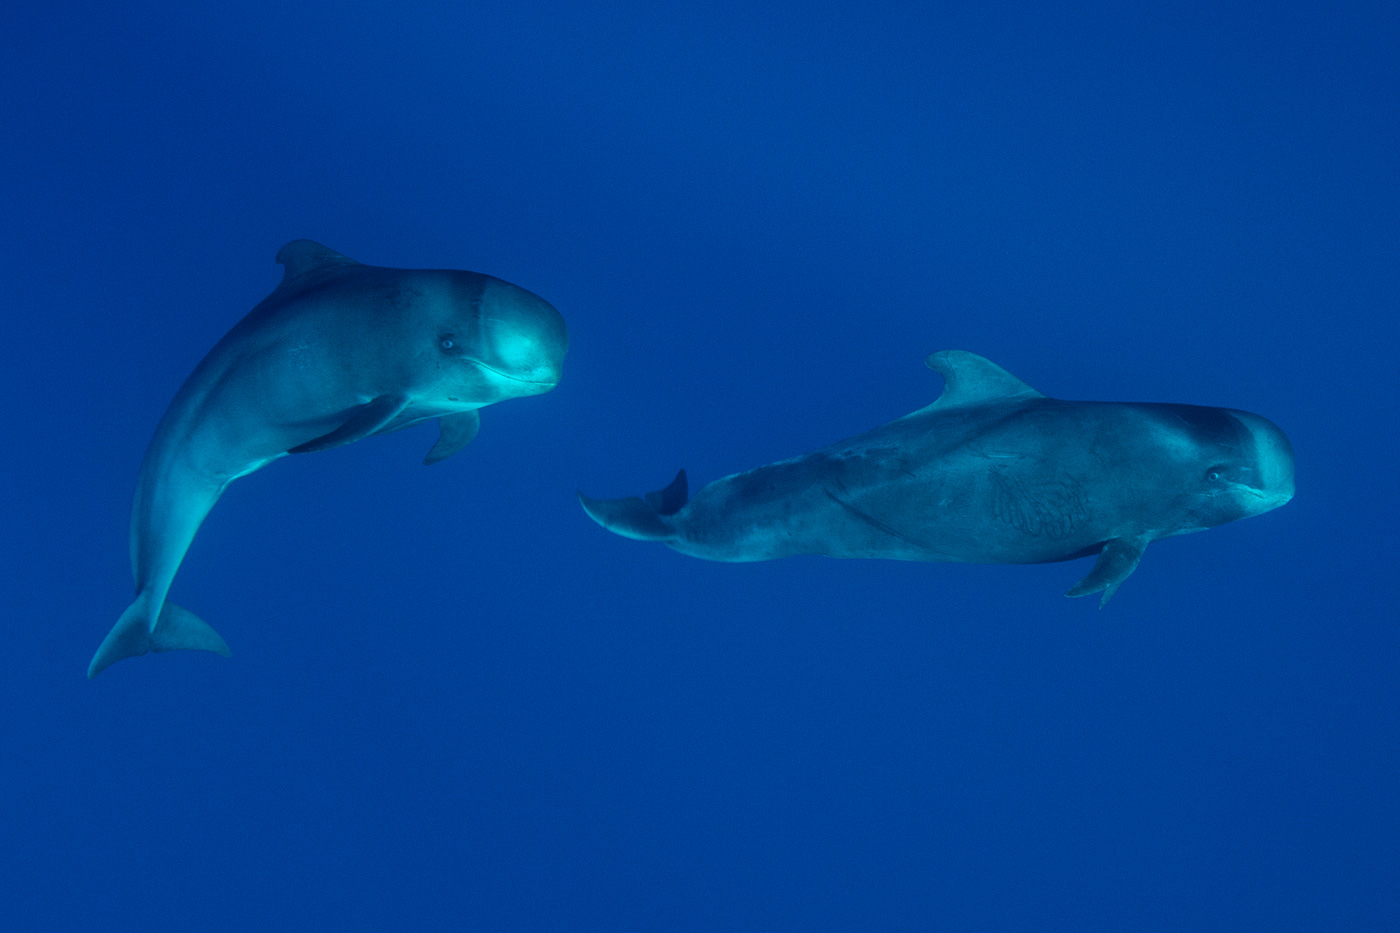 two_baby_pilot_whales_azores